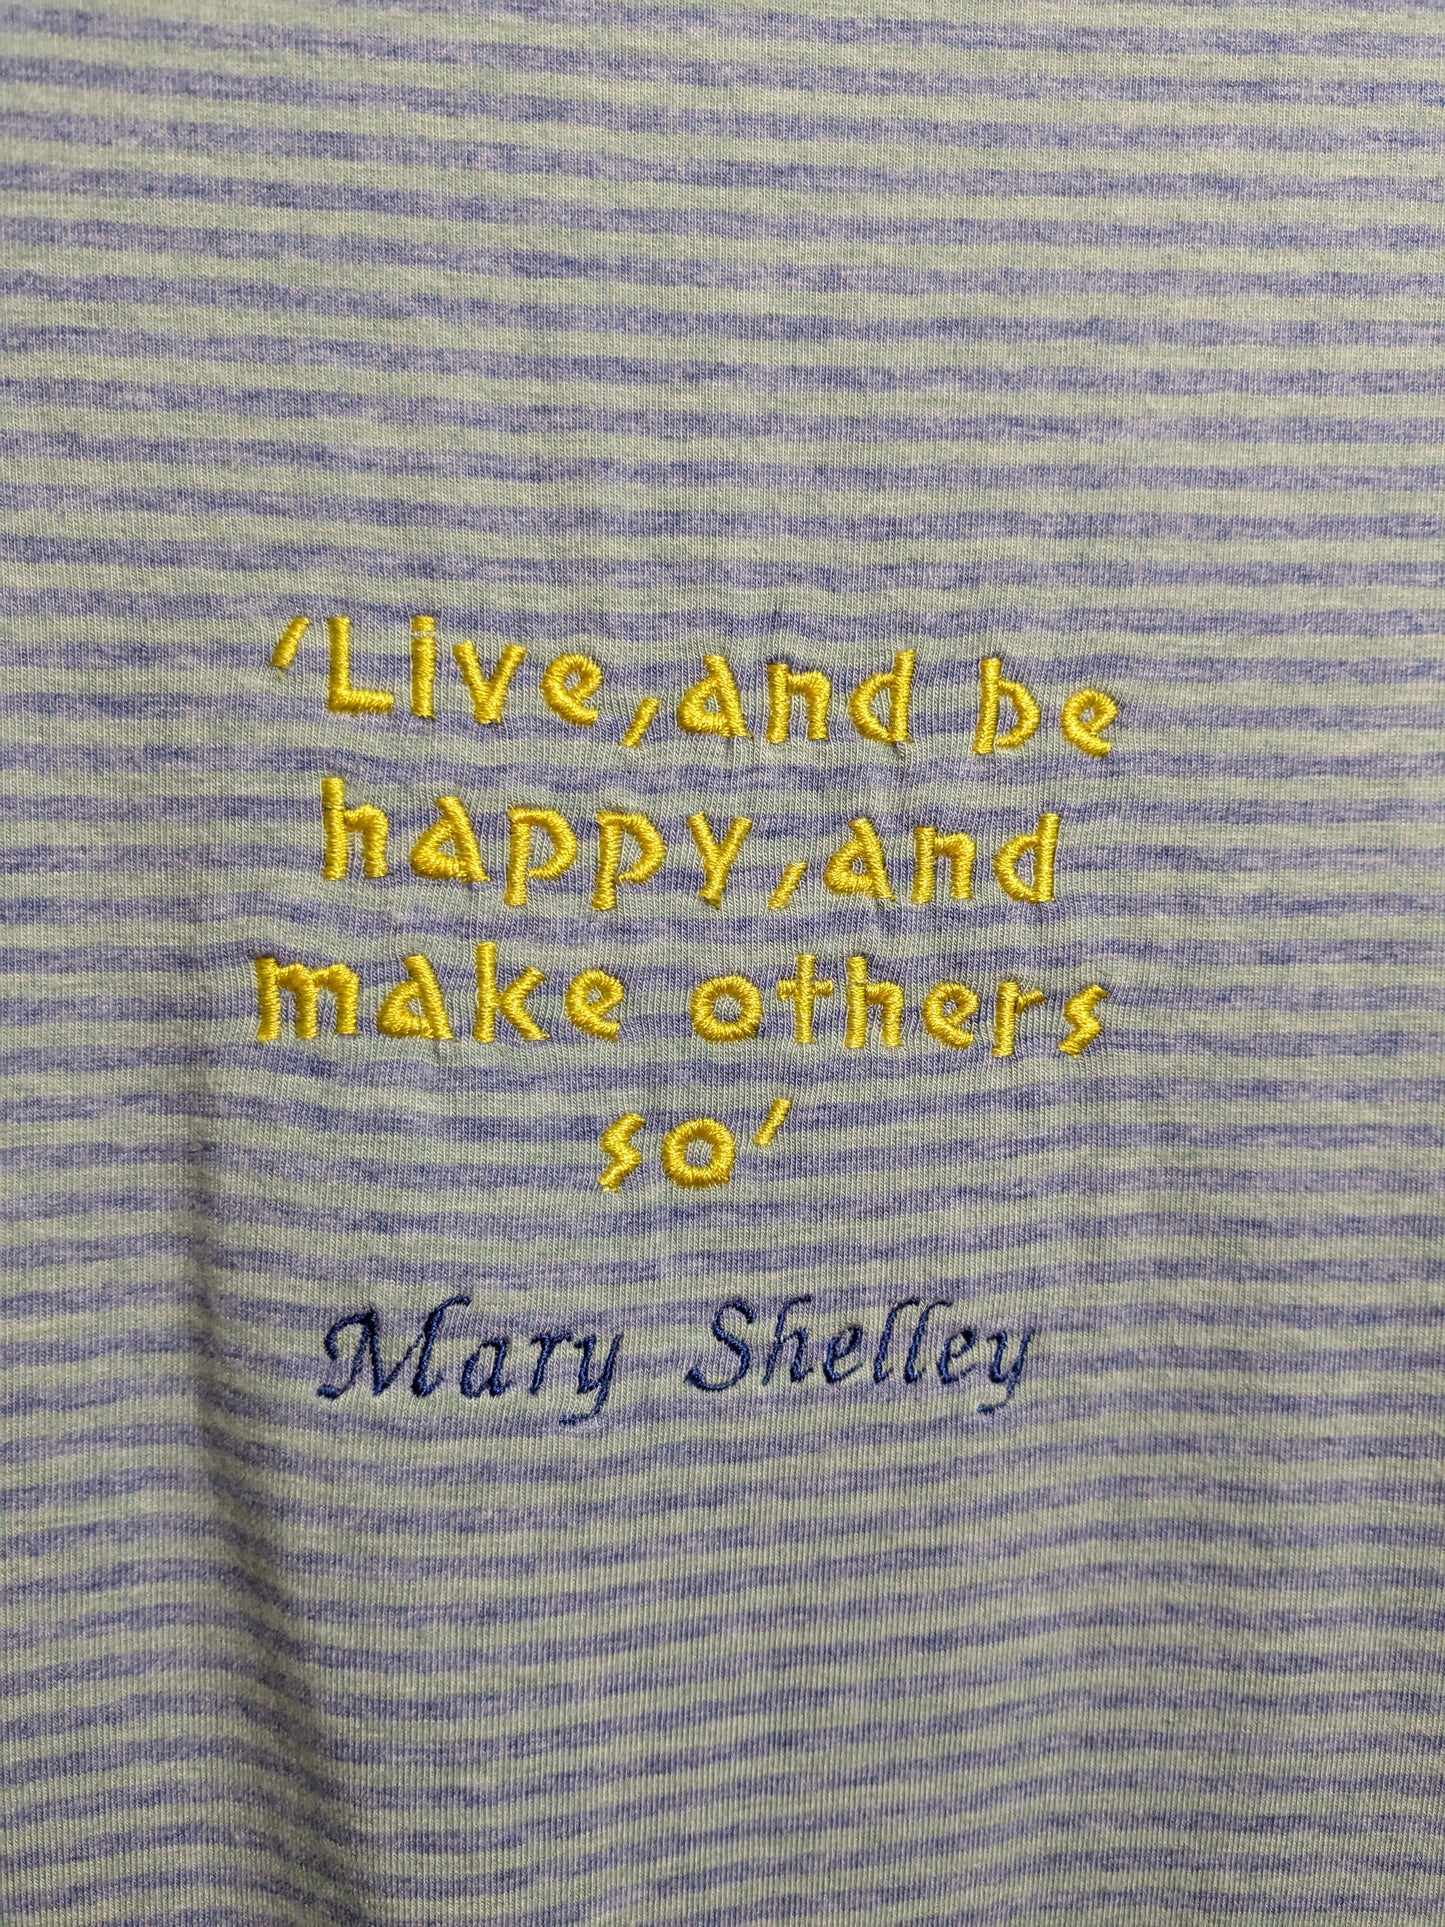 Size 10 Reworked Women's Nightie - Bamboo Super Soft Material - Embroidered Mary Shelley Bookish Quote